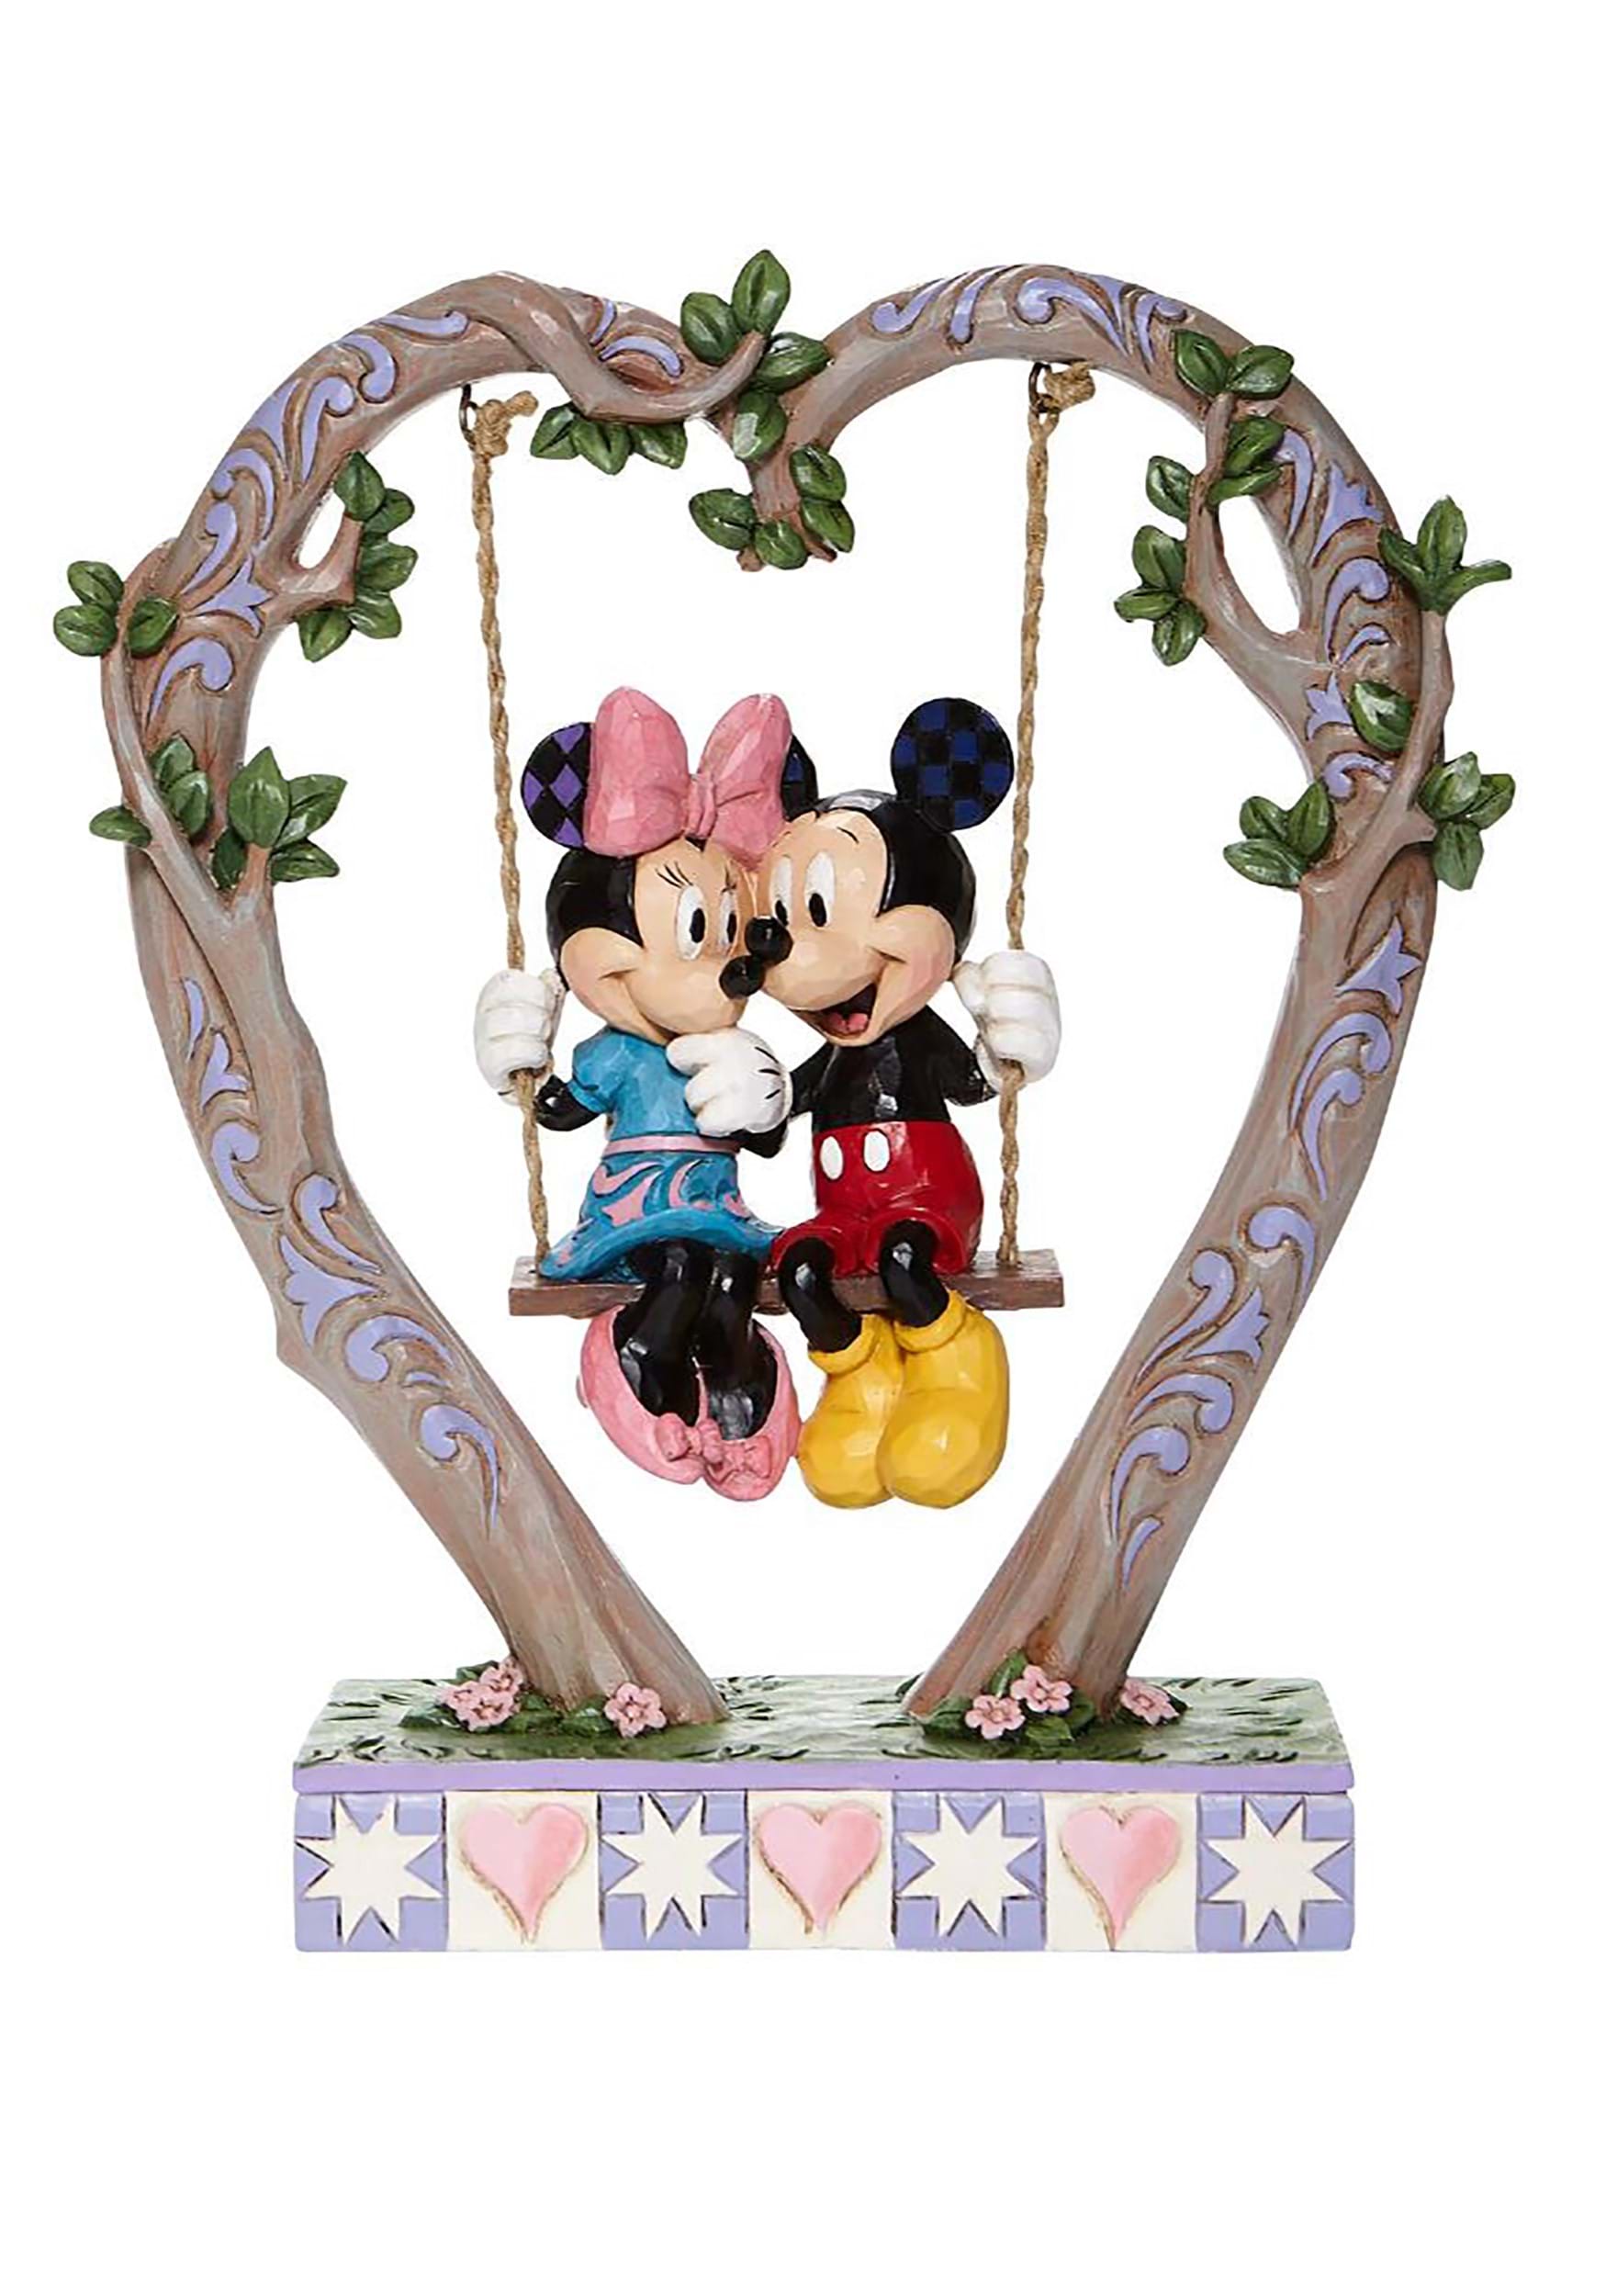 Jim Shore Mickey Mouse and Minnie Mouse Sweethearts on Swing Statue